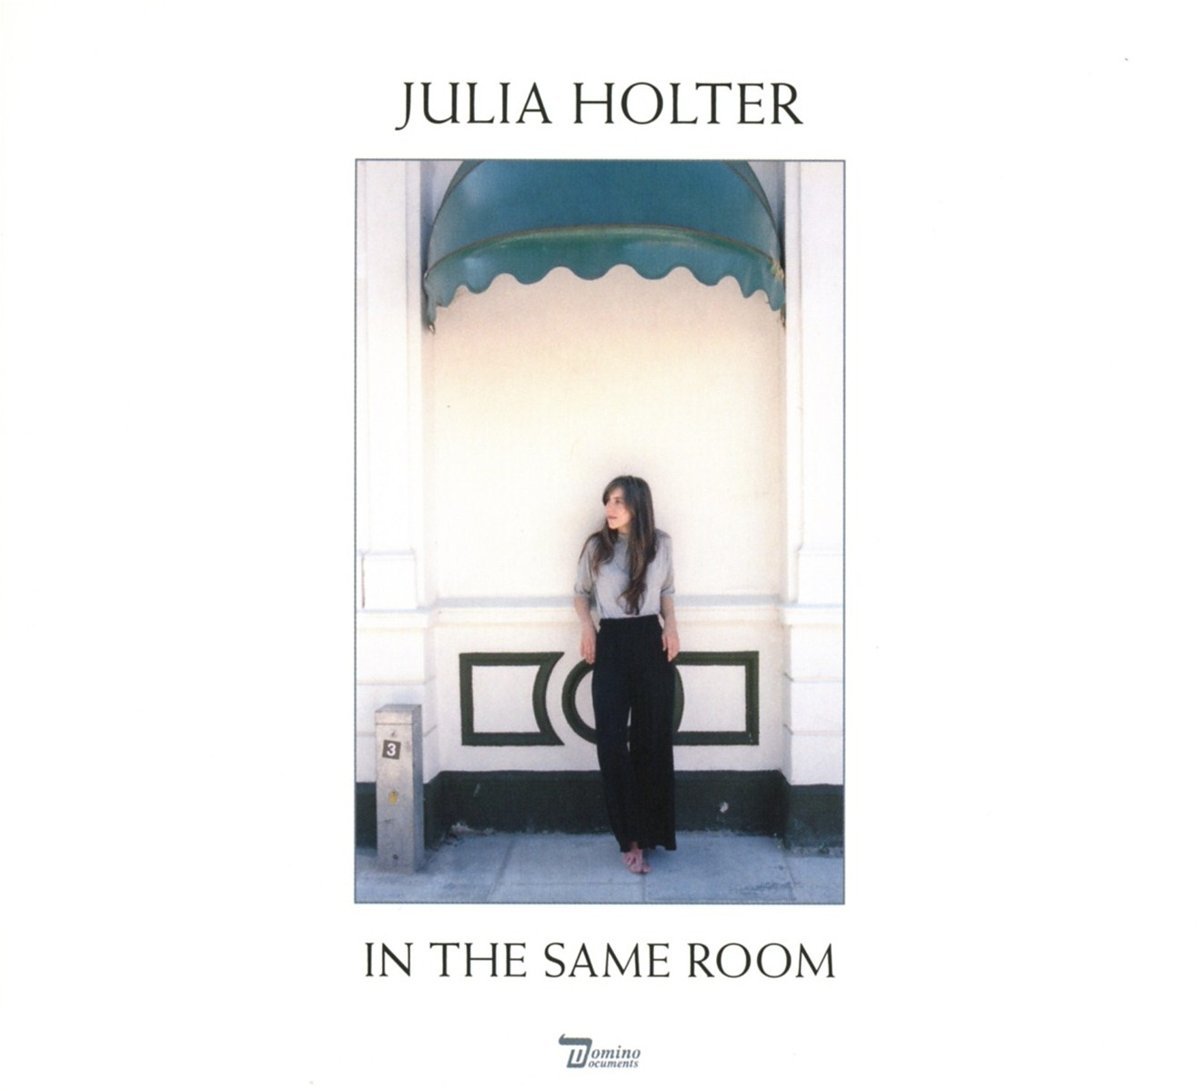 Julia Holter – IN THE SAME ROOM; VÖ: 31.03.2017